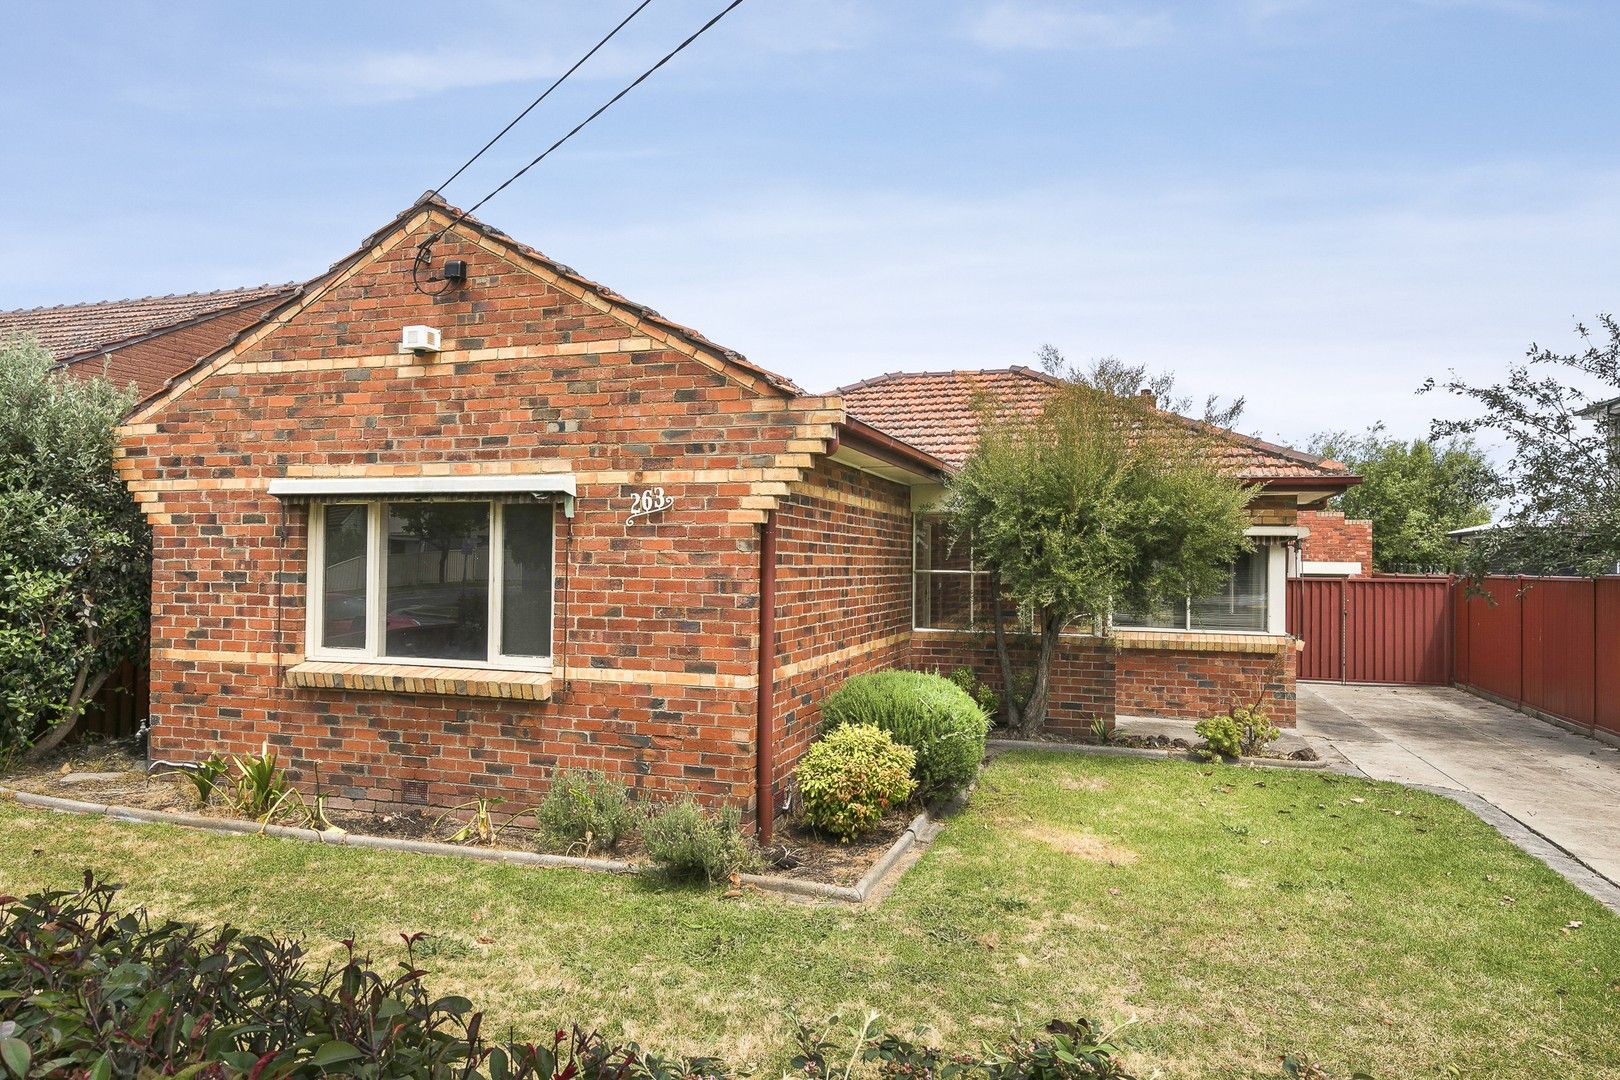 2 bedrooms House in 263 Gaffney St PASCOE VALE VIC, 3044